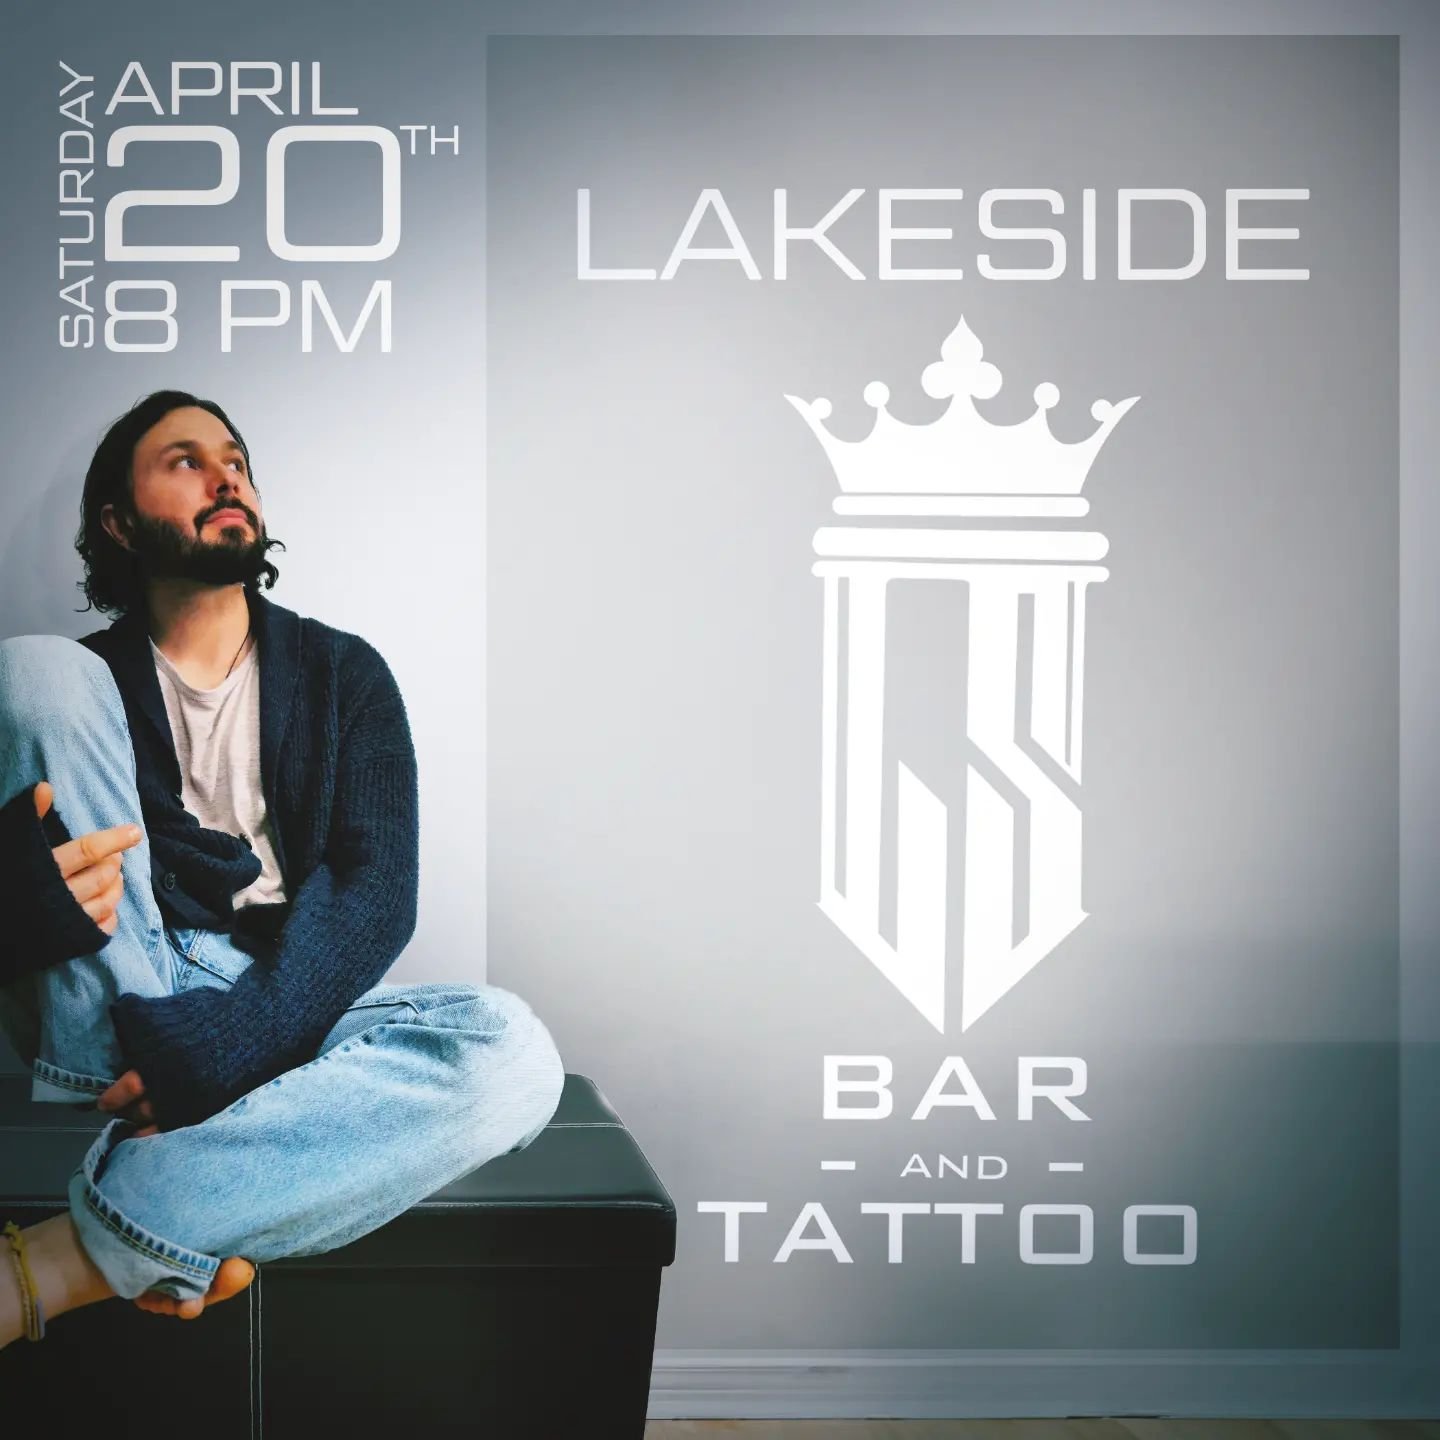 Sliding into 420 in the chillest place this side of the Great Lakes folks! Come say hello!! 🥳😎🥴
.
.
.
.
.
#YanNickMichaud #lakesidebarandtattoo #420 #livemusic #bathontario #ygkmusician #YanNickMichaud #KingstonOntario #OntarioMusic #CanadianMusic